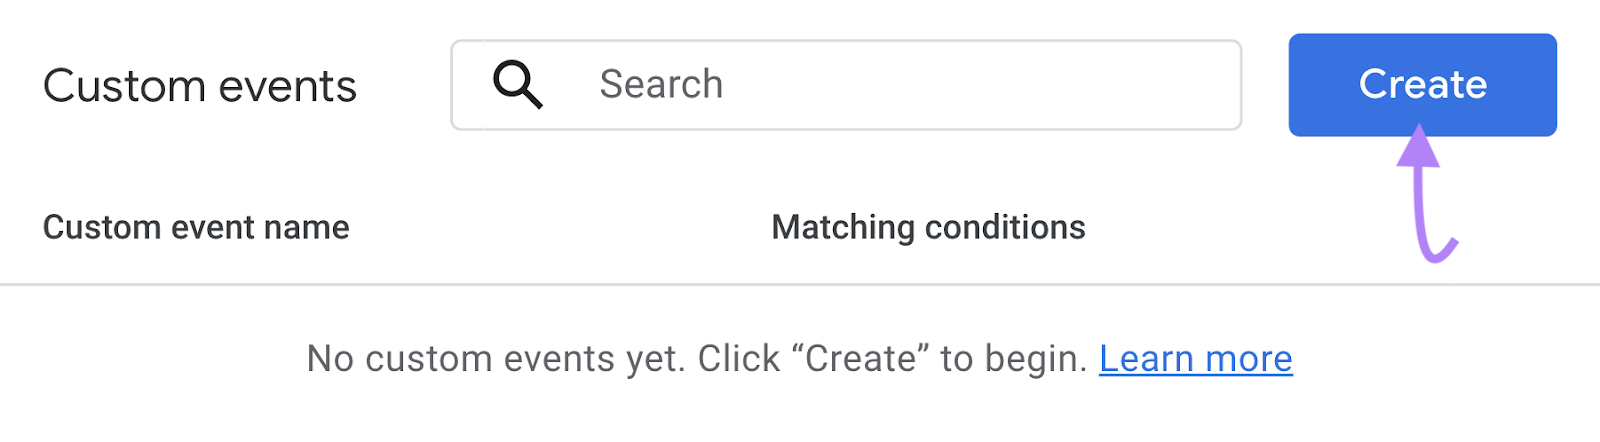 "Create" button highlighted